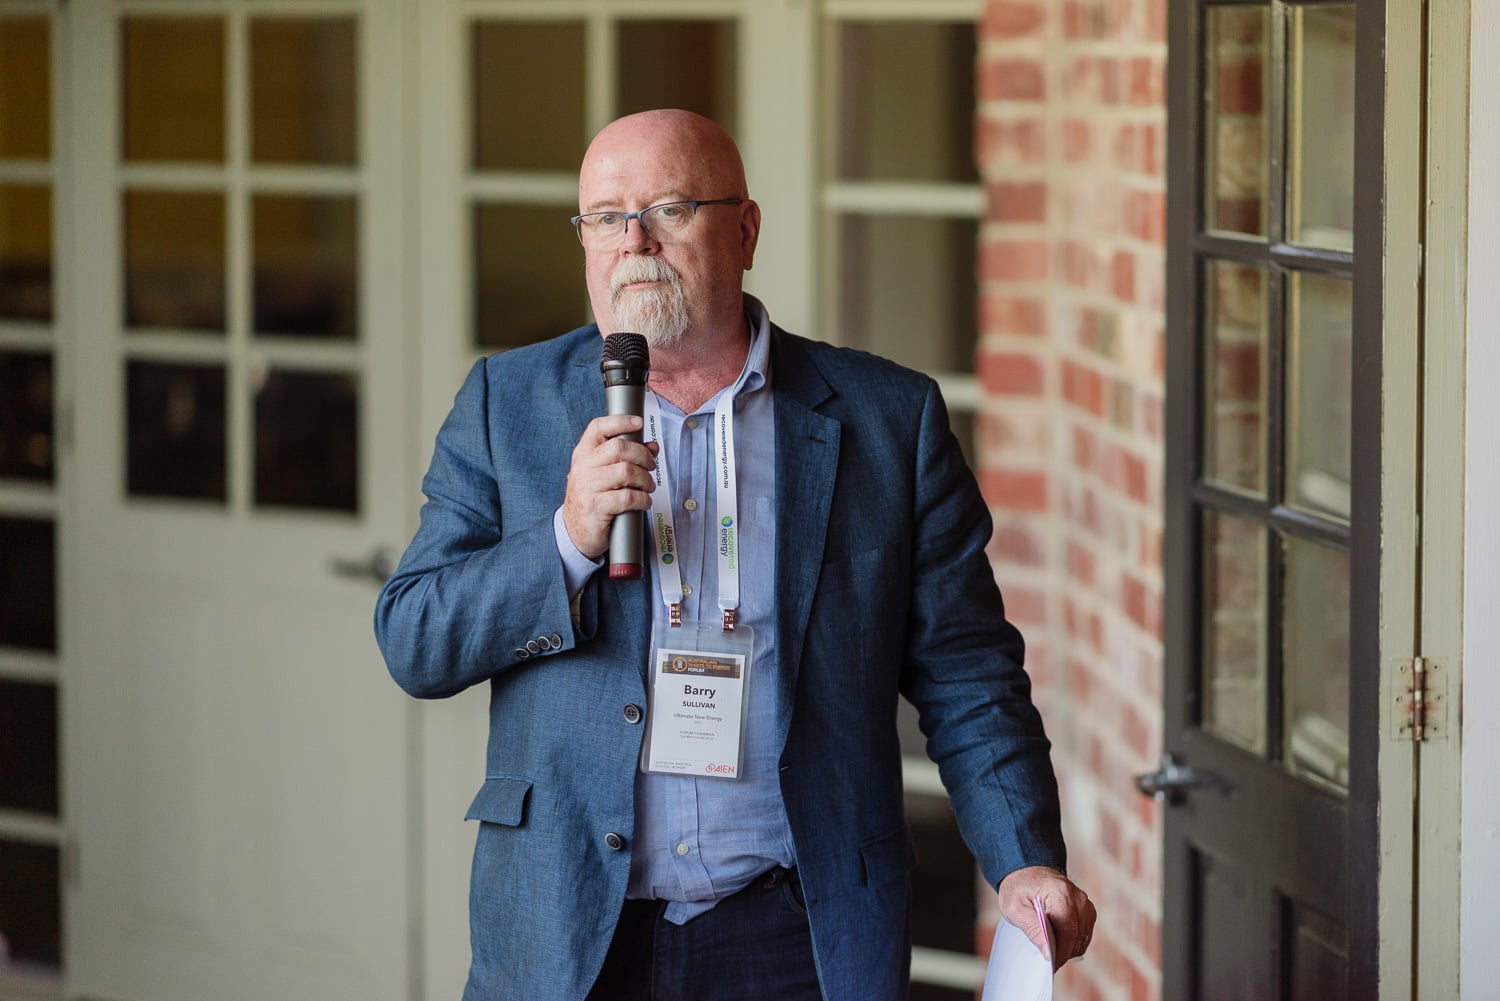 Barry Sullivan speaks at the AIEN conference 2019